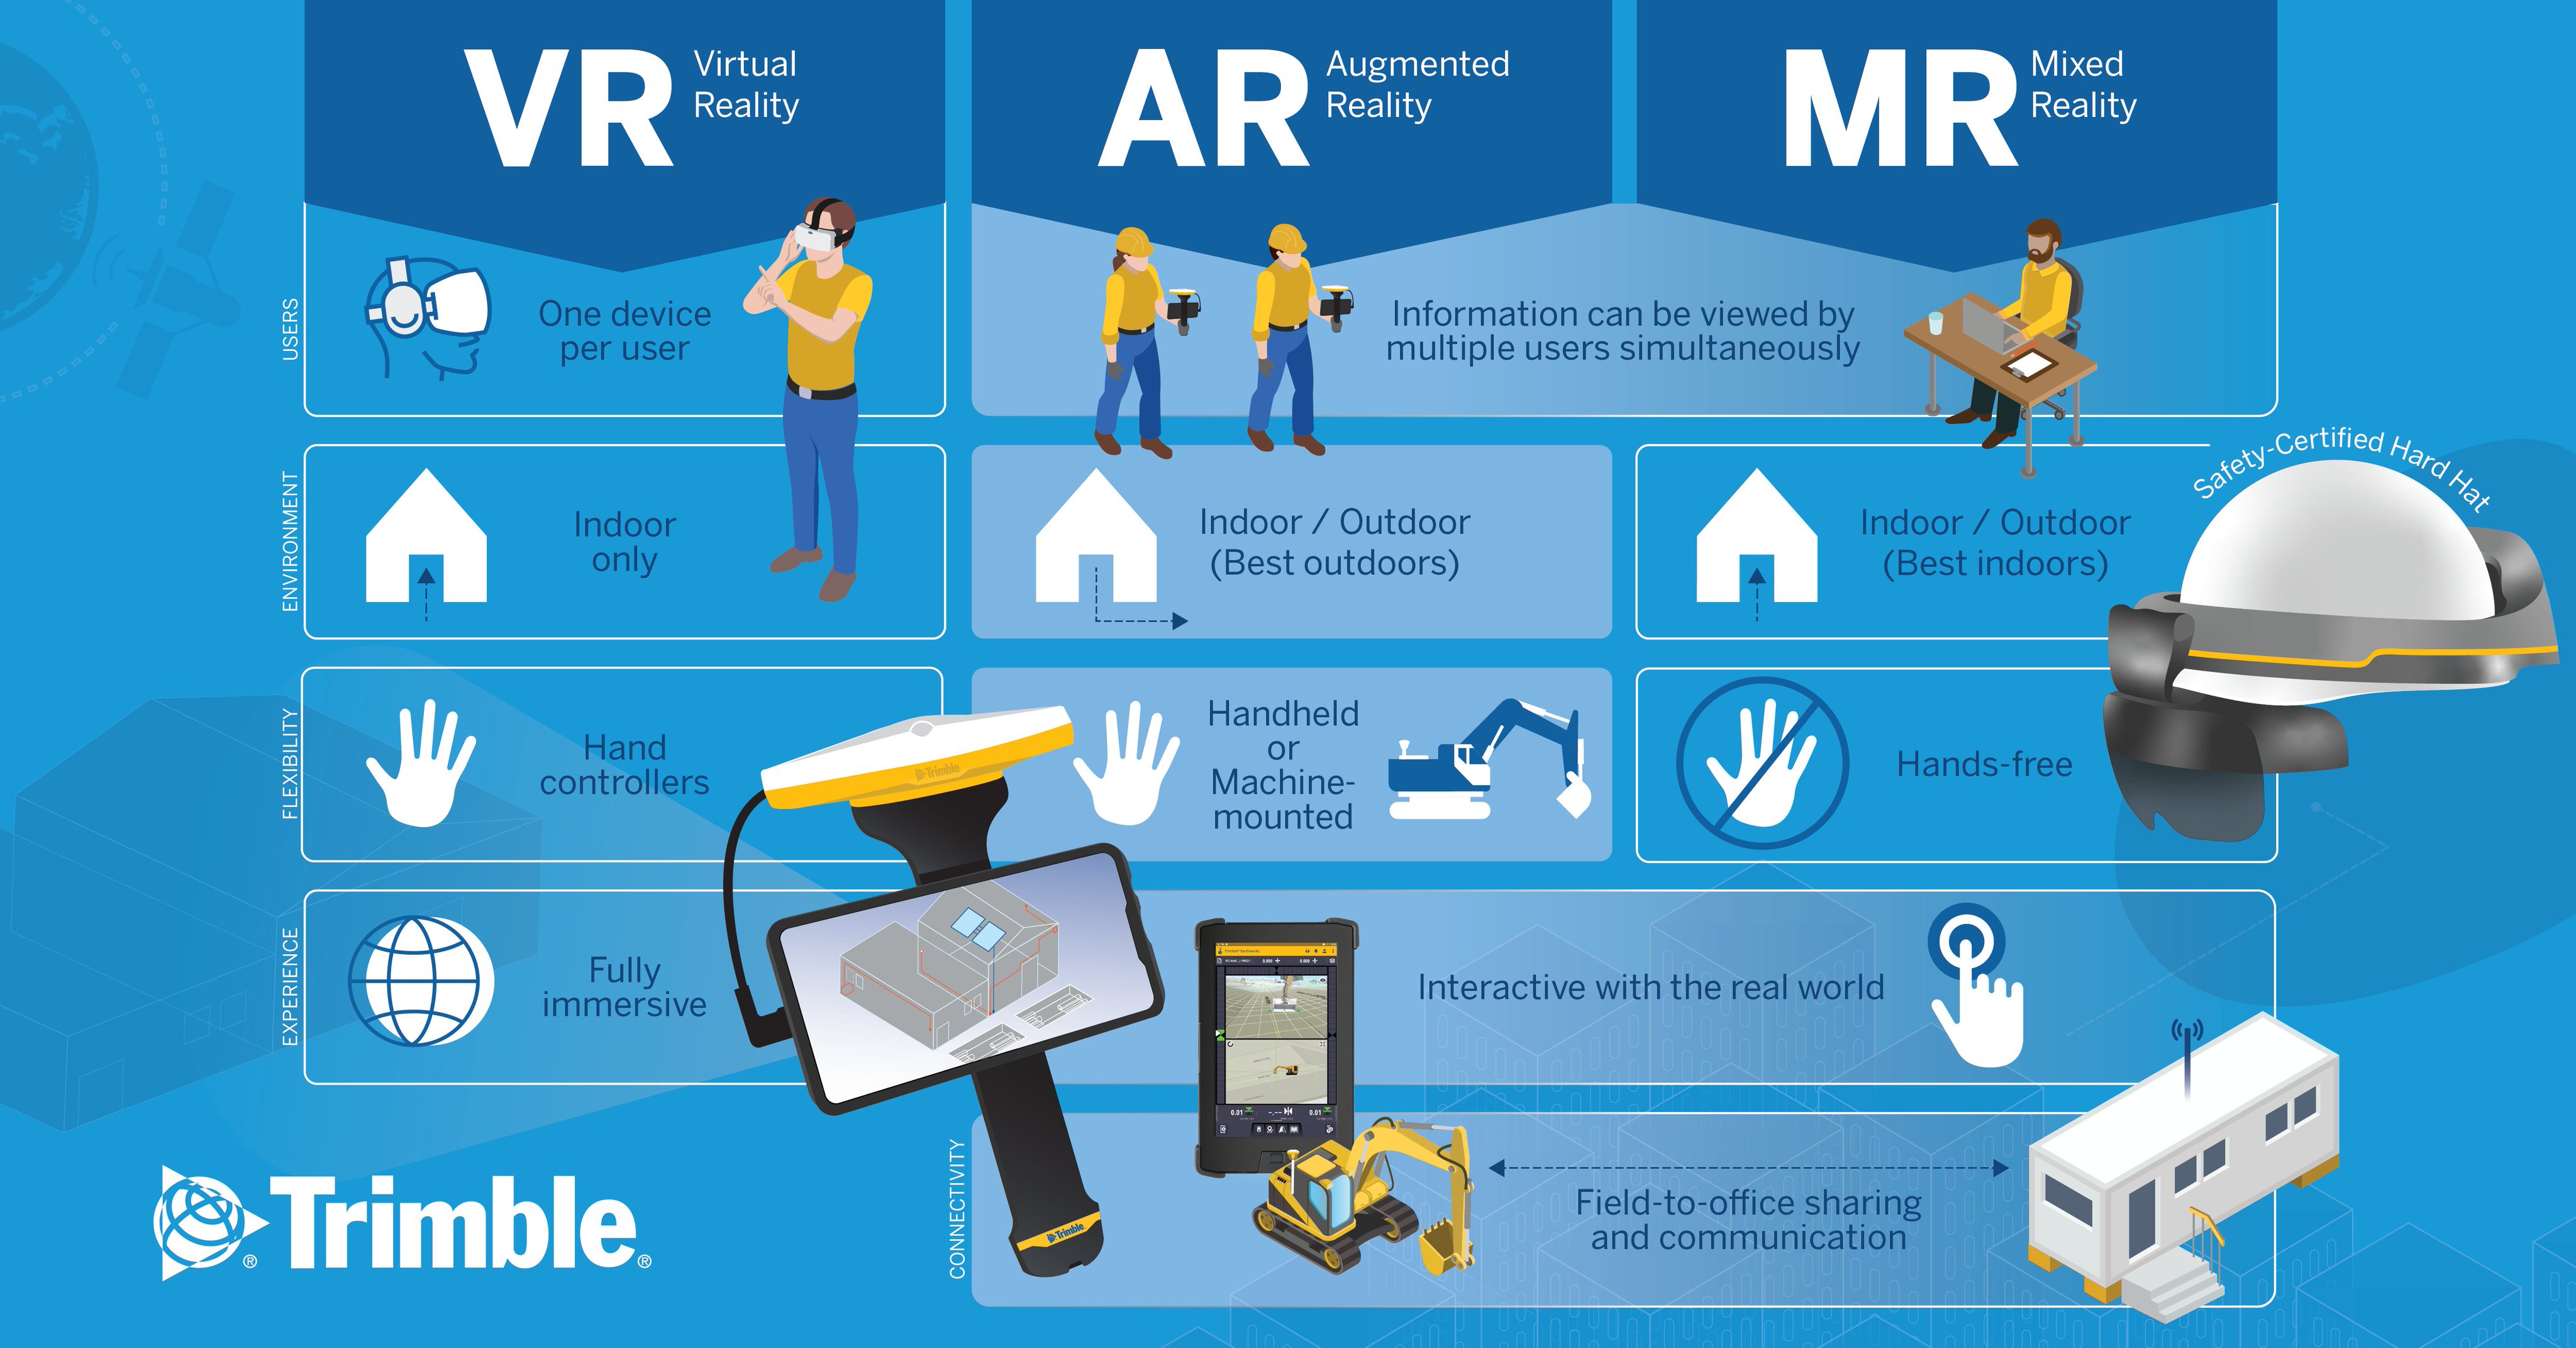 Twitter Buildings："What's the difference between AR, VR, and MR? Check out Trimble's helpful #virtualreality #mixedreality https://t.co/uIF8FyifIG" / Twitter